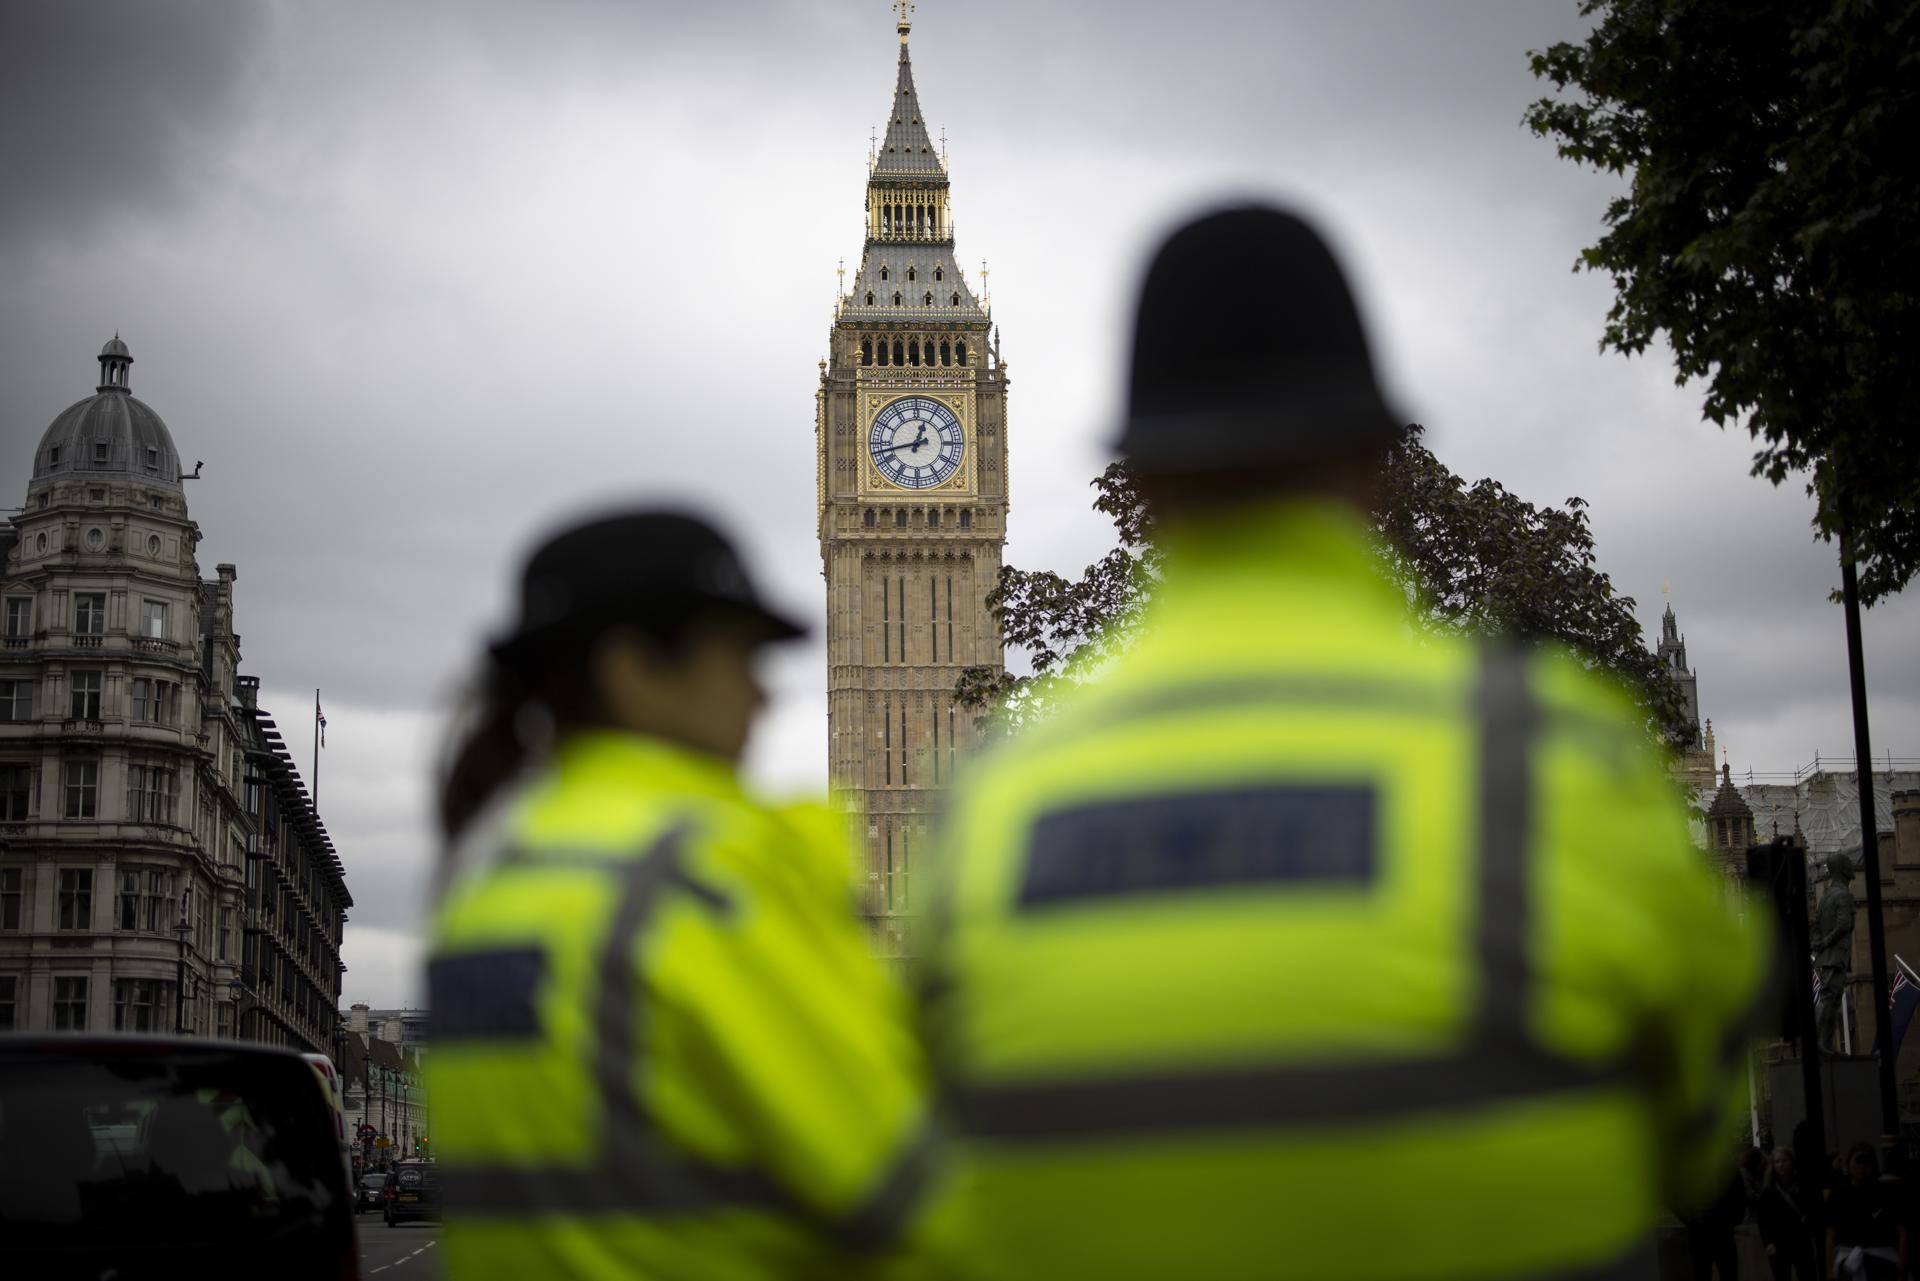 London (United Kingdom), 06/06/2022.- Police officers patrol in Westminster with the Elizabeth Tower in the background in London, Britain, 06 June 2022. British Prime Minister Boris Johnson faces a vote of no confidence following the publication of the official civil service investigation into Downing Street parties during the COVID-19 lockdown, dubbed Sue Gray report. (Reino Unido, Londres) EFE/EPA/TOLGA AKMEN